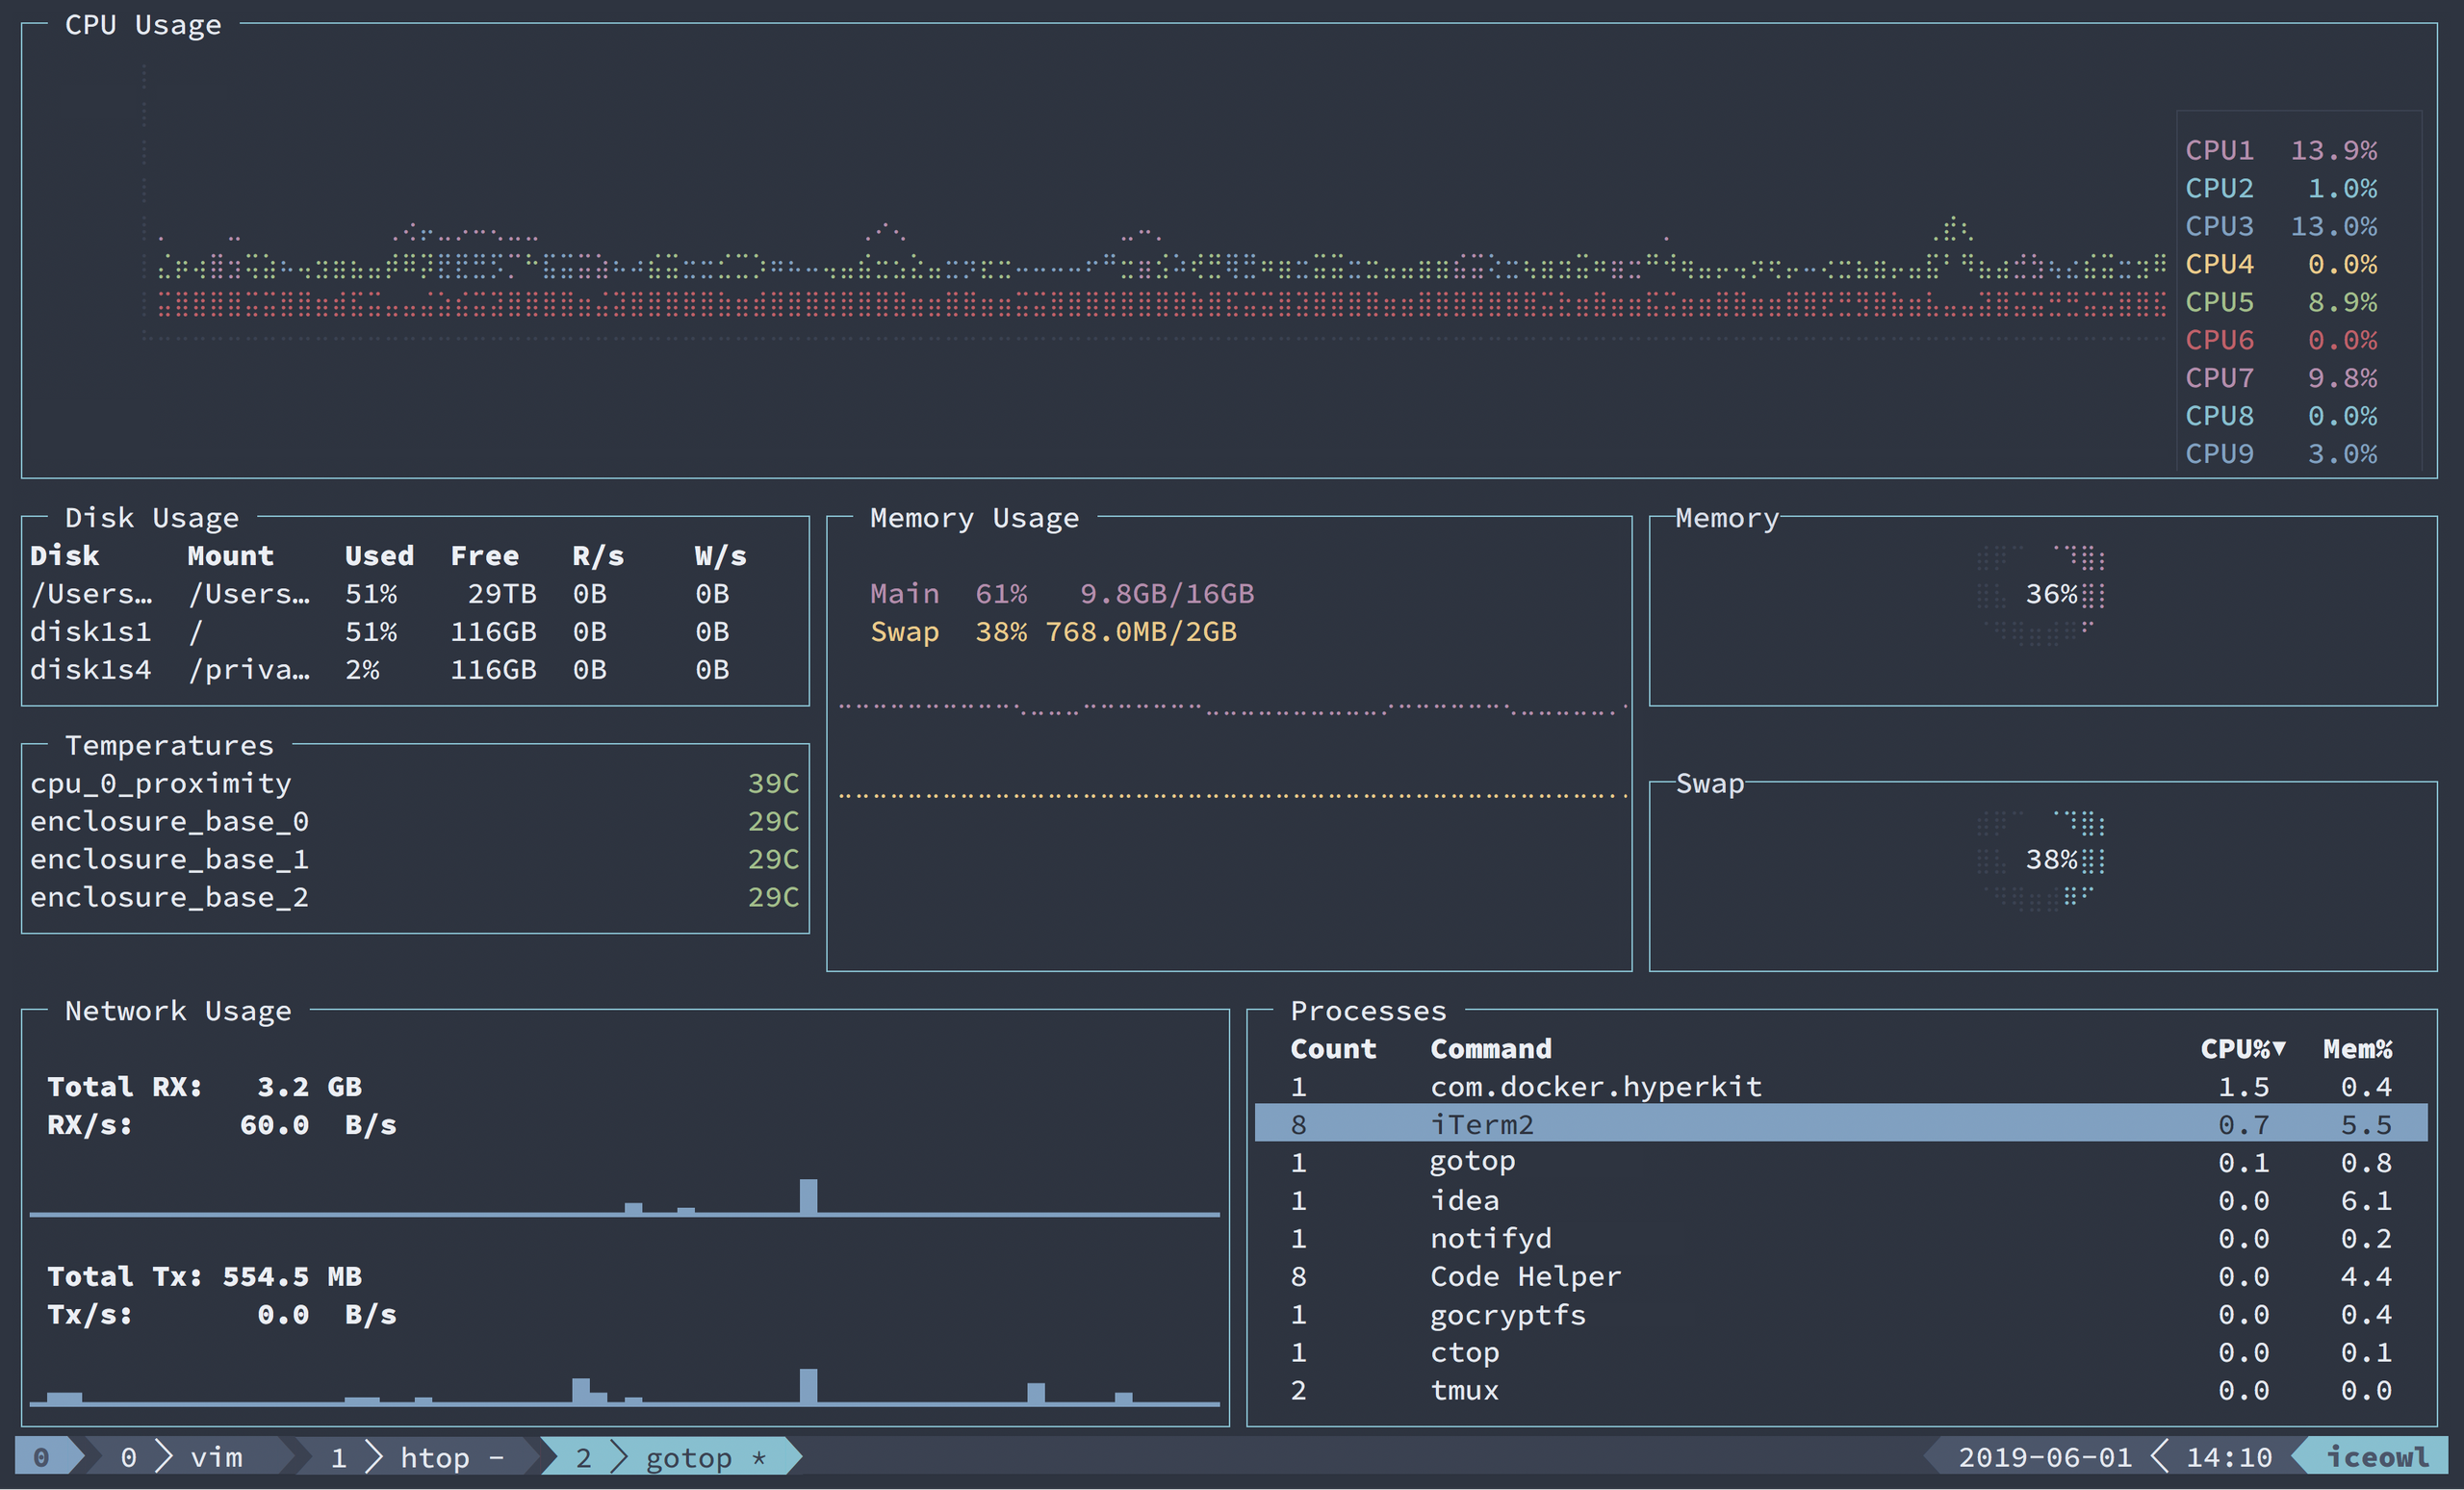 Screenshot showing a fluidly merged UI of tmux with gotop.